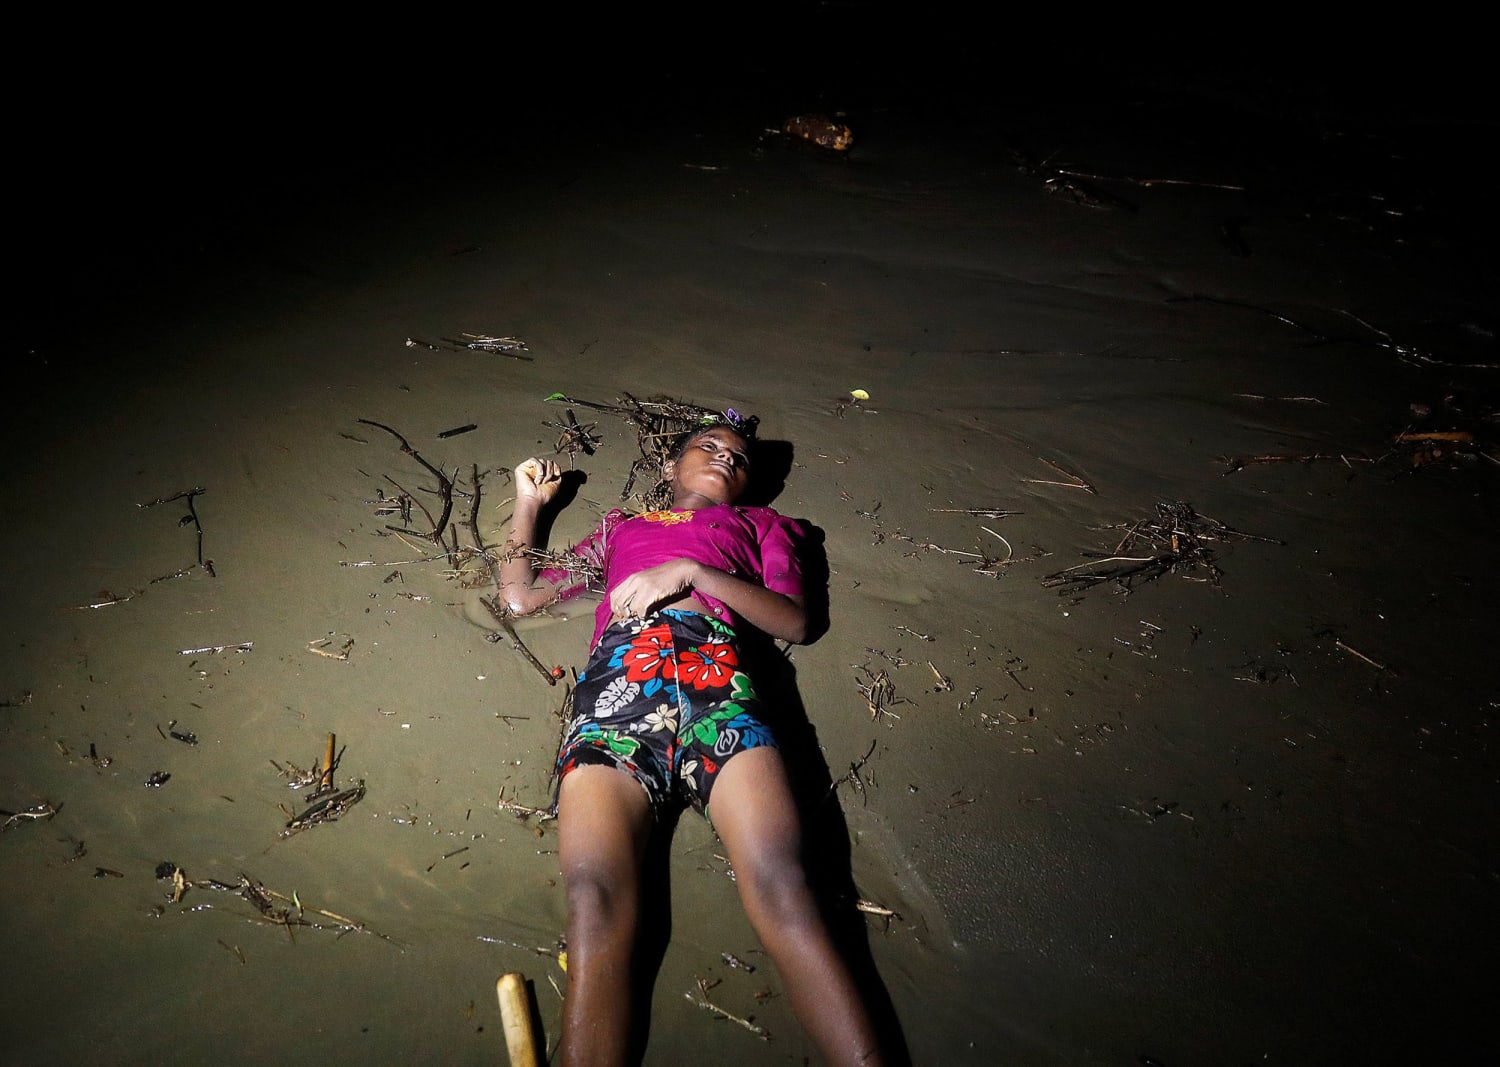 Rohingya running out of space to bury their dead, Rohingya